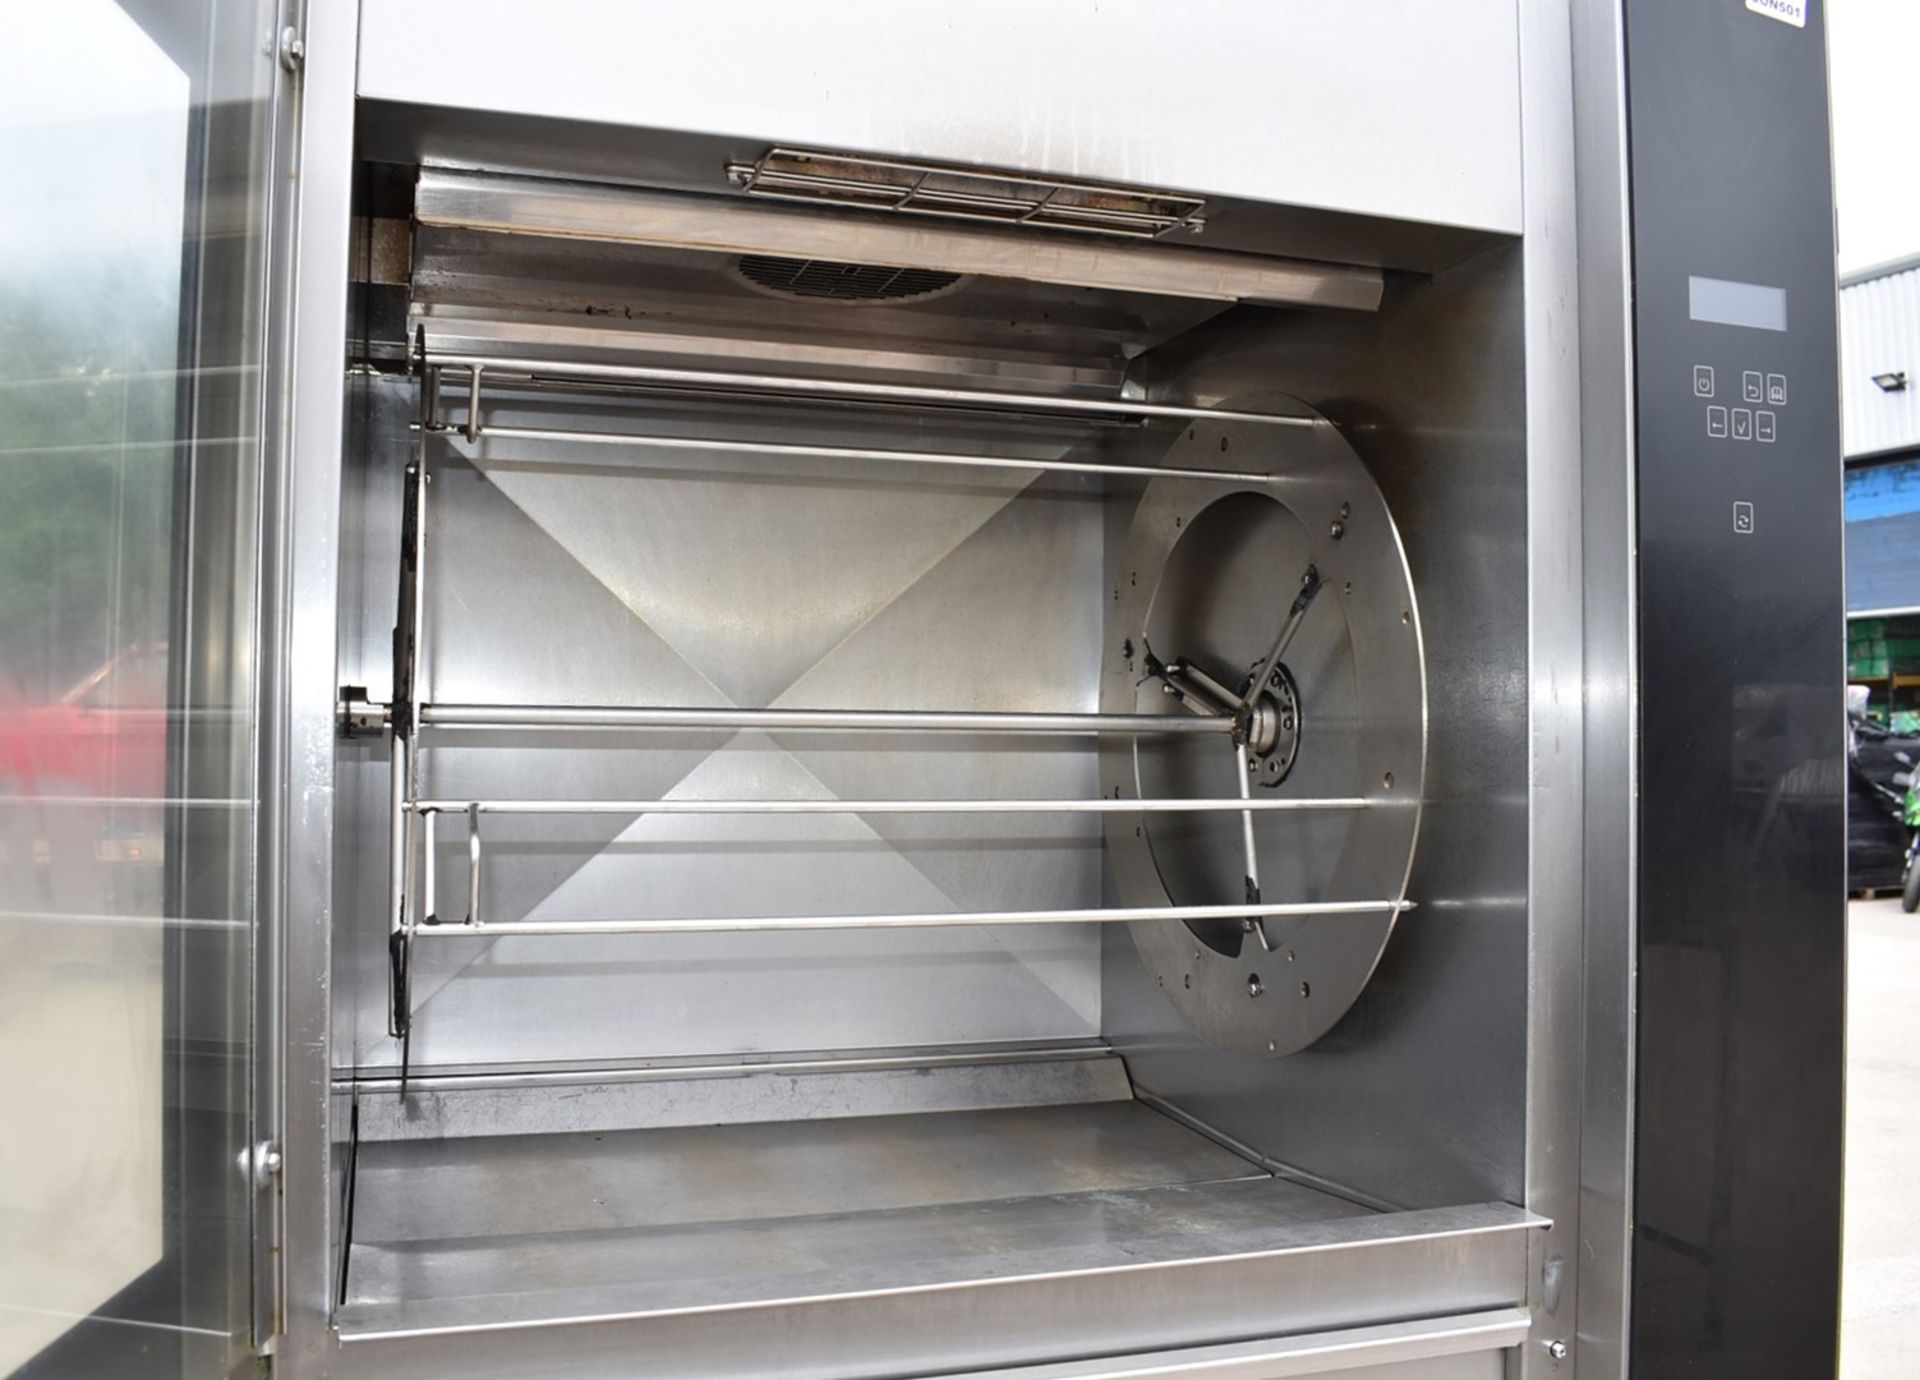 1 x Houno Electric Combi Oven and Fri-jado Rotisserie Oven Combo With Stand - 3 Phase - Image 11 of 22